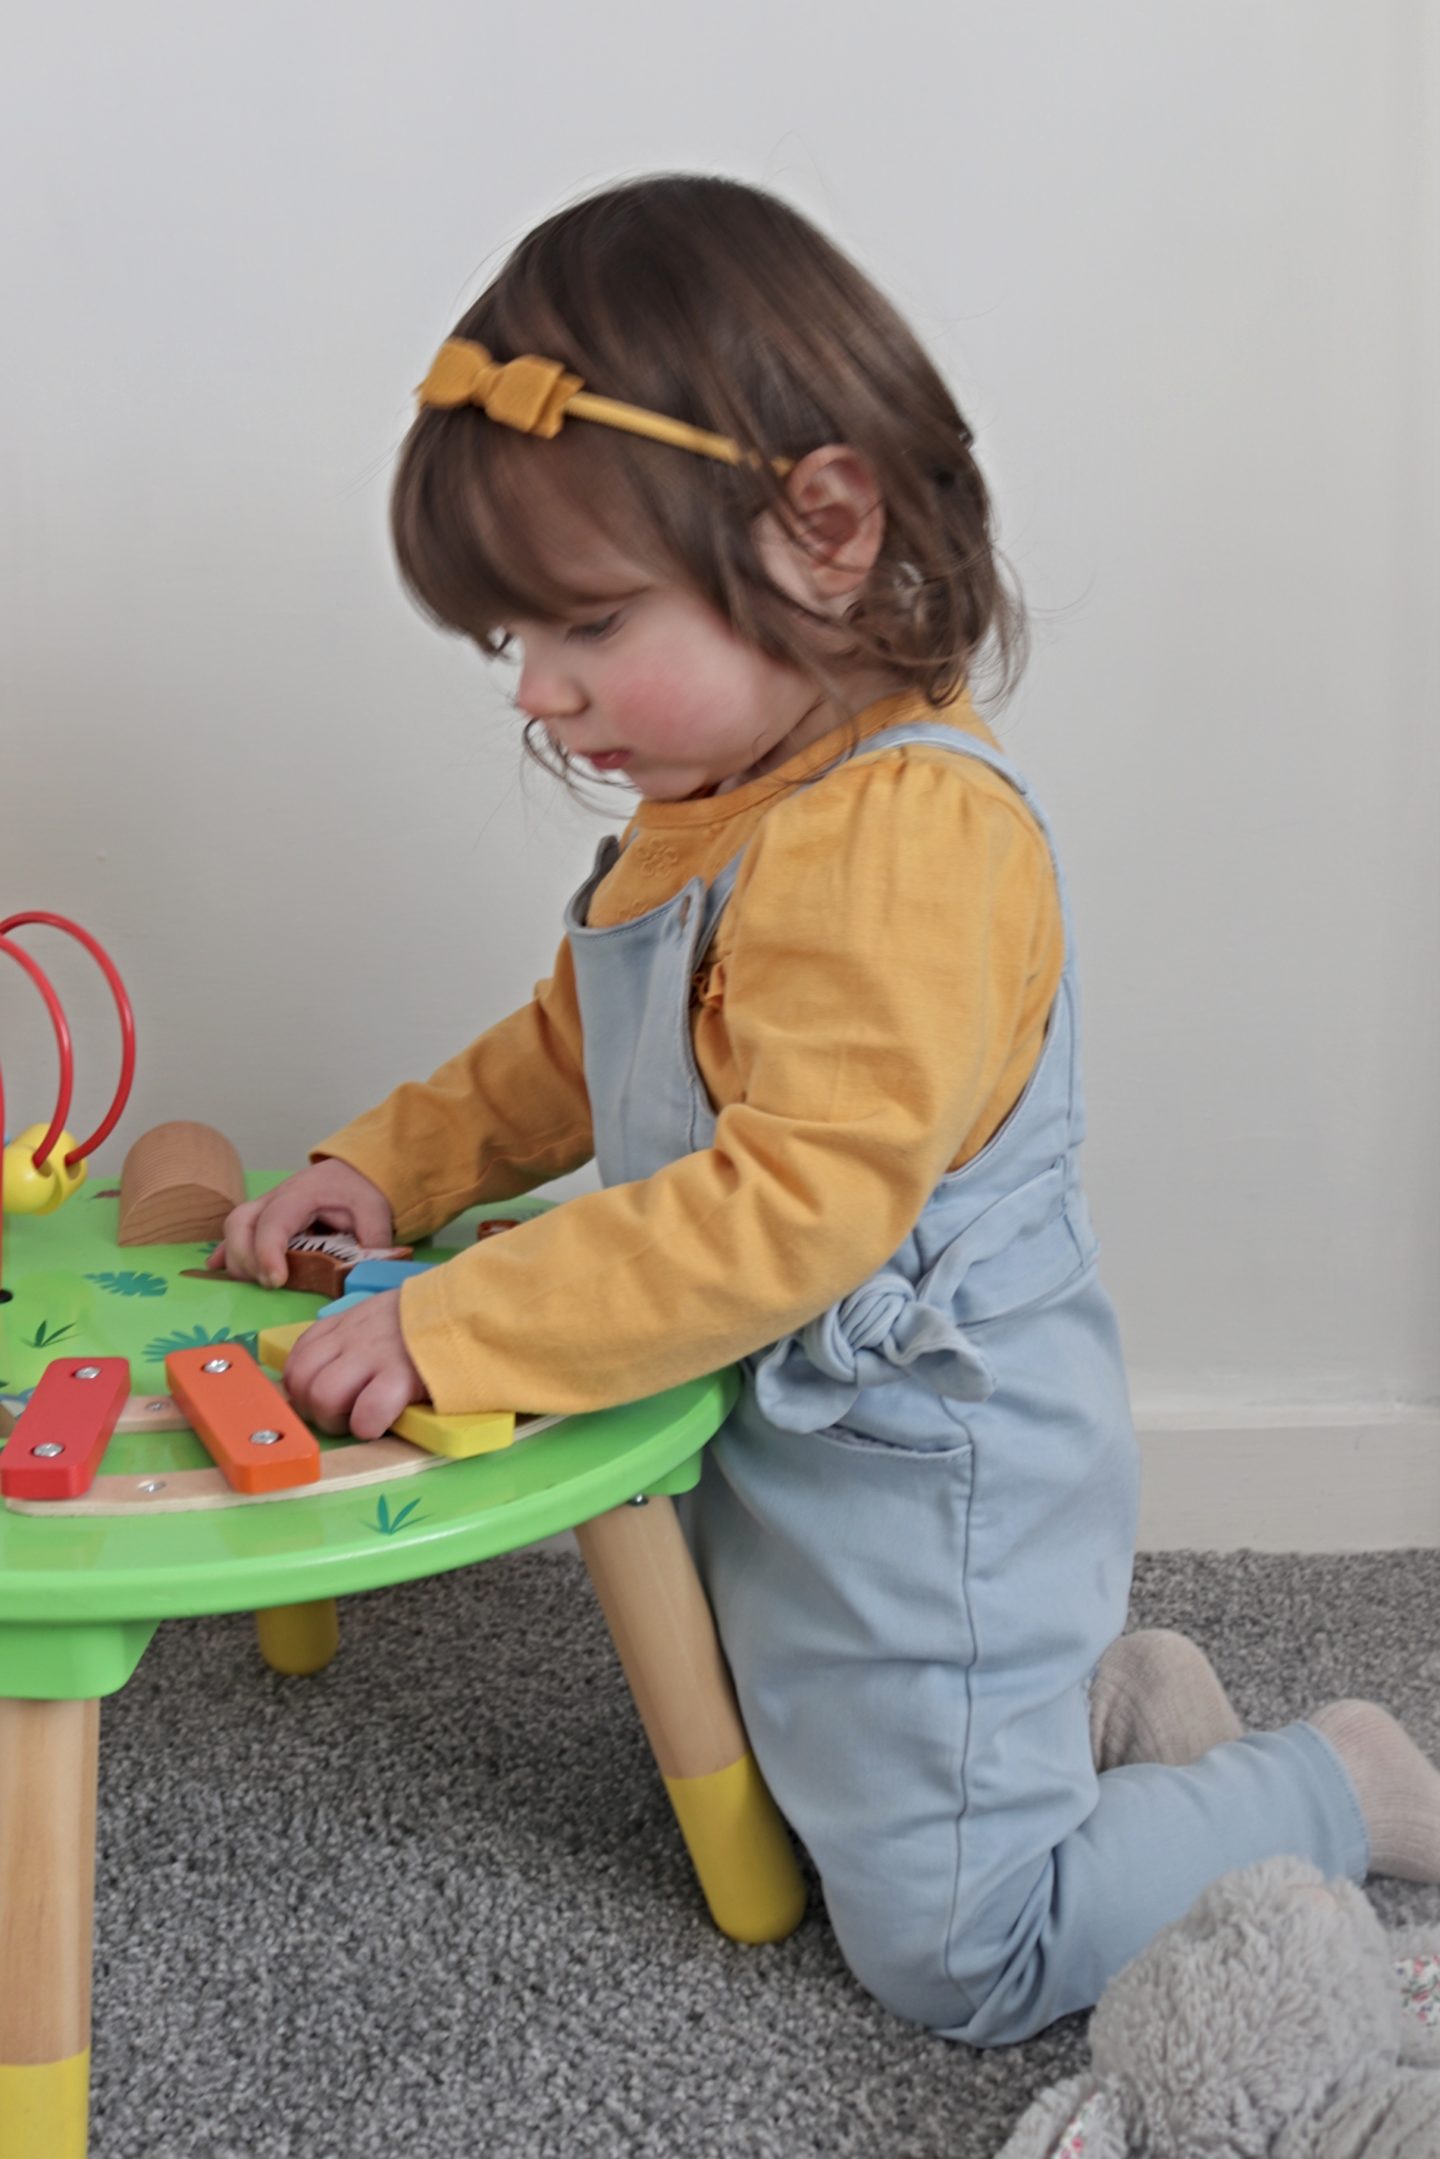 Noa in the blue dungarees and ochre coloured top